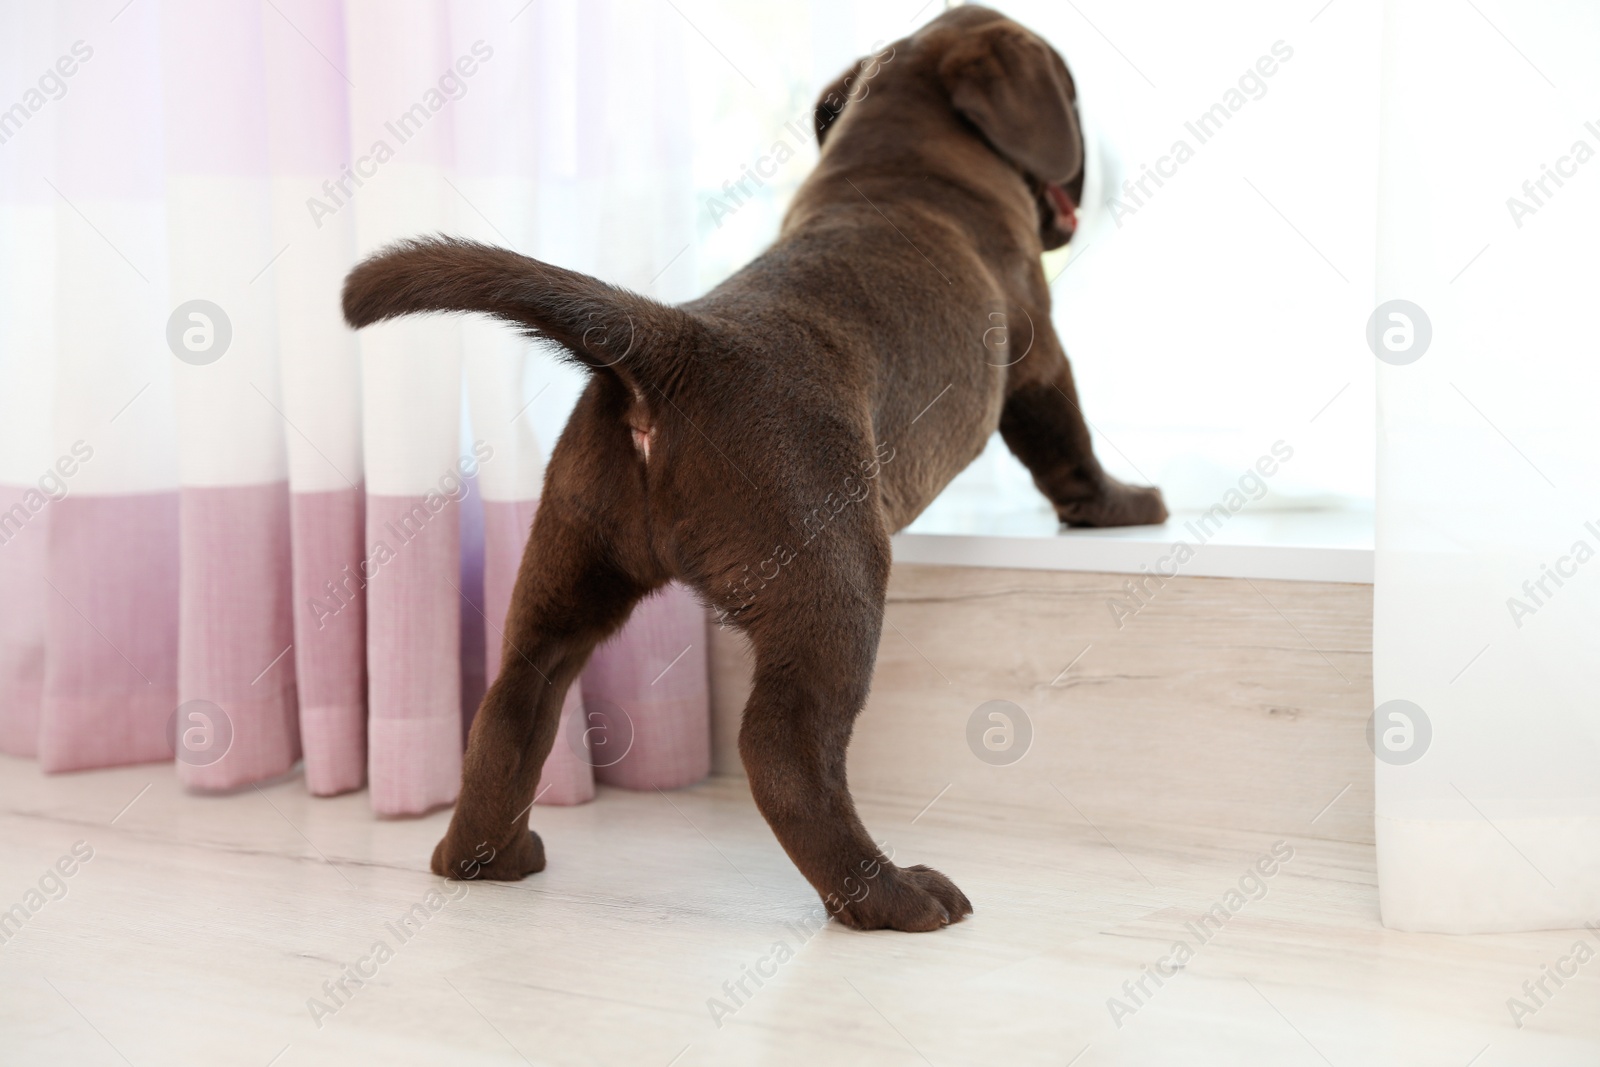 Photo of Chocolate Labrador Retriever puppy looking out window indoors